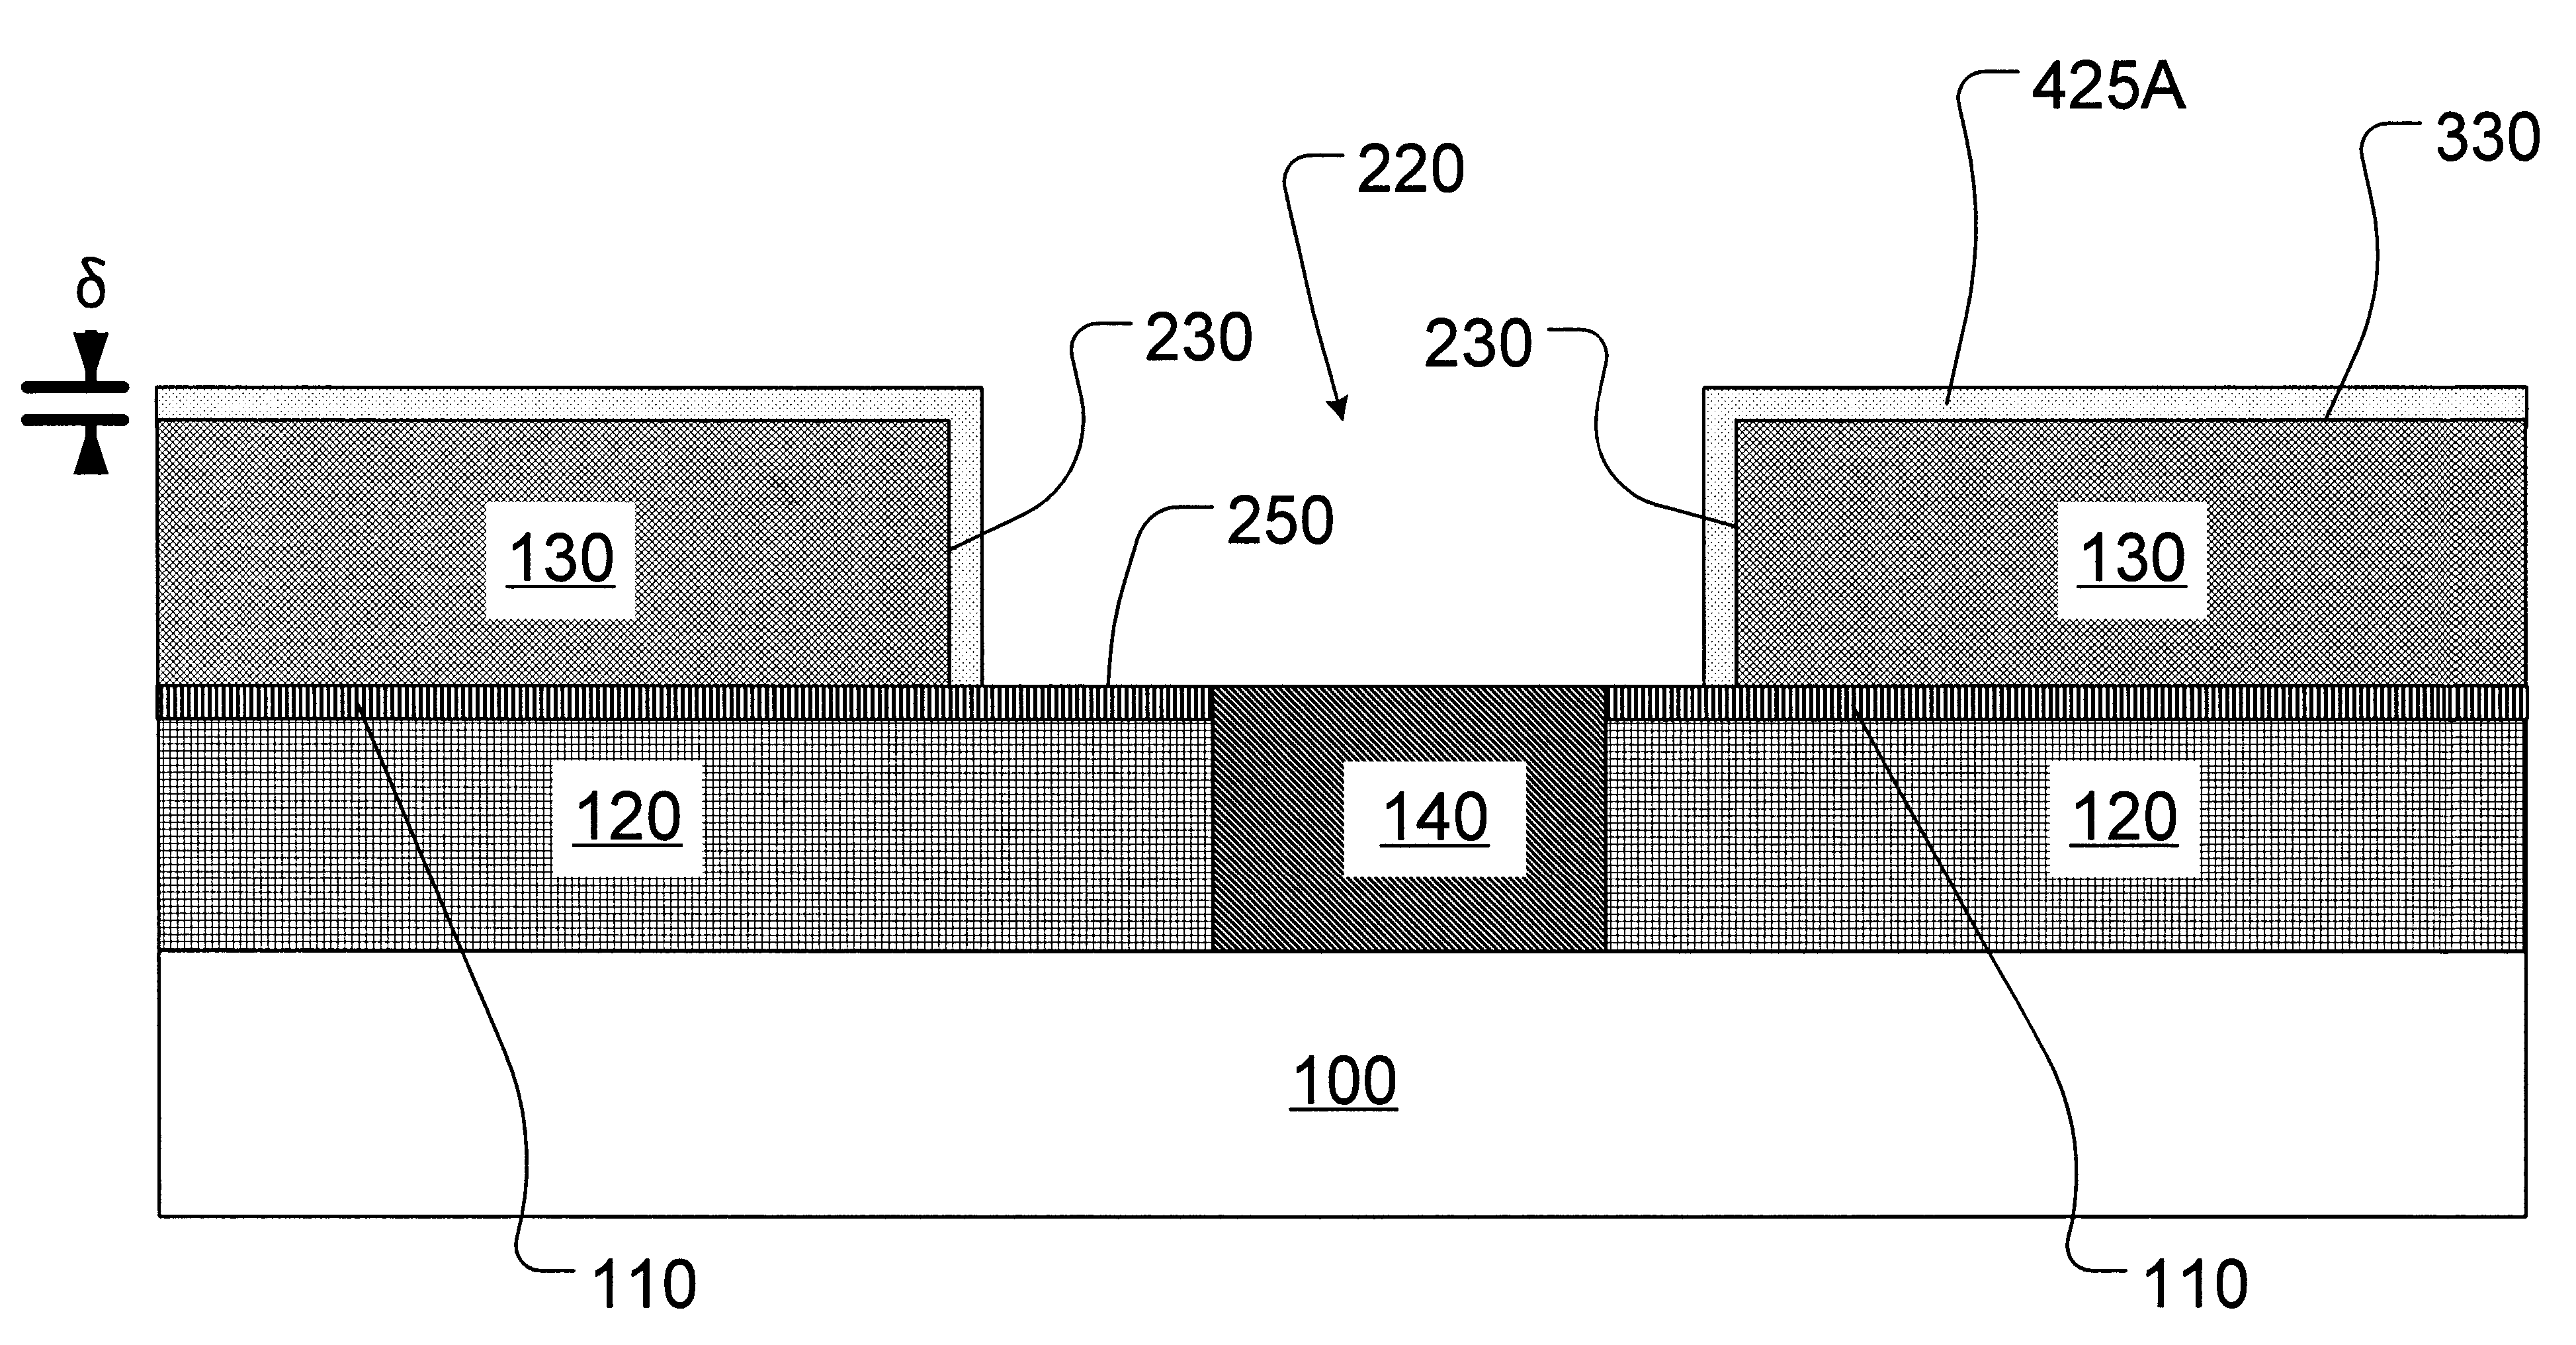 Reverse electroplating of barrier metal layer to improve electromigration performance in copper interconnect devices